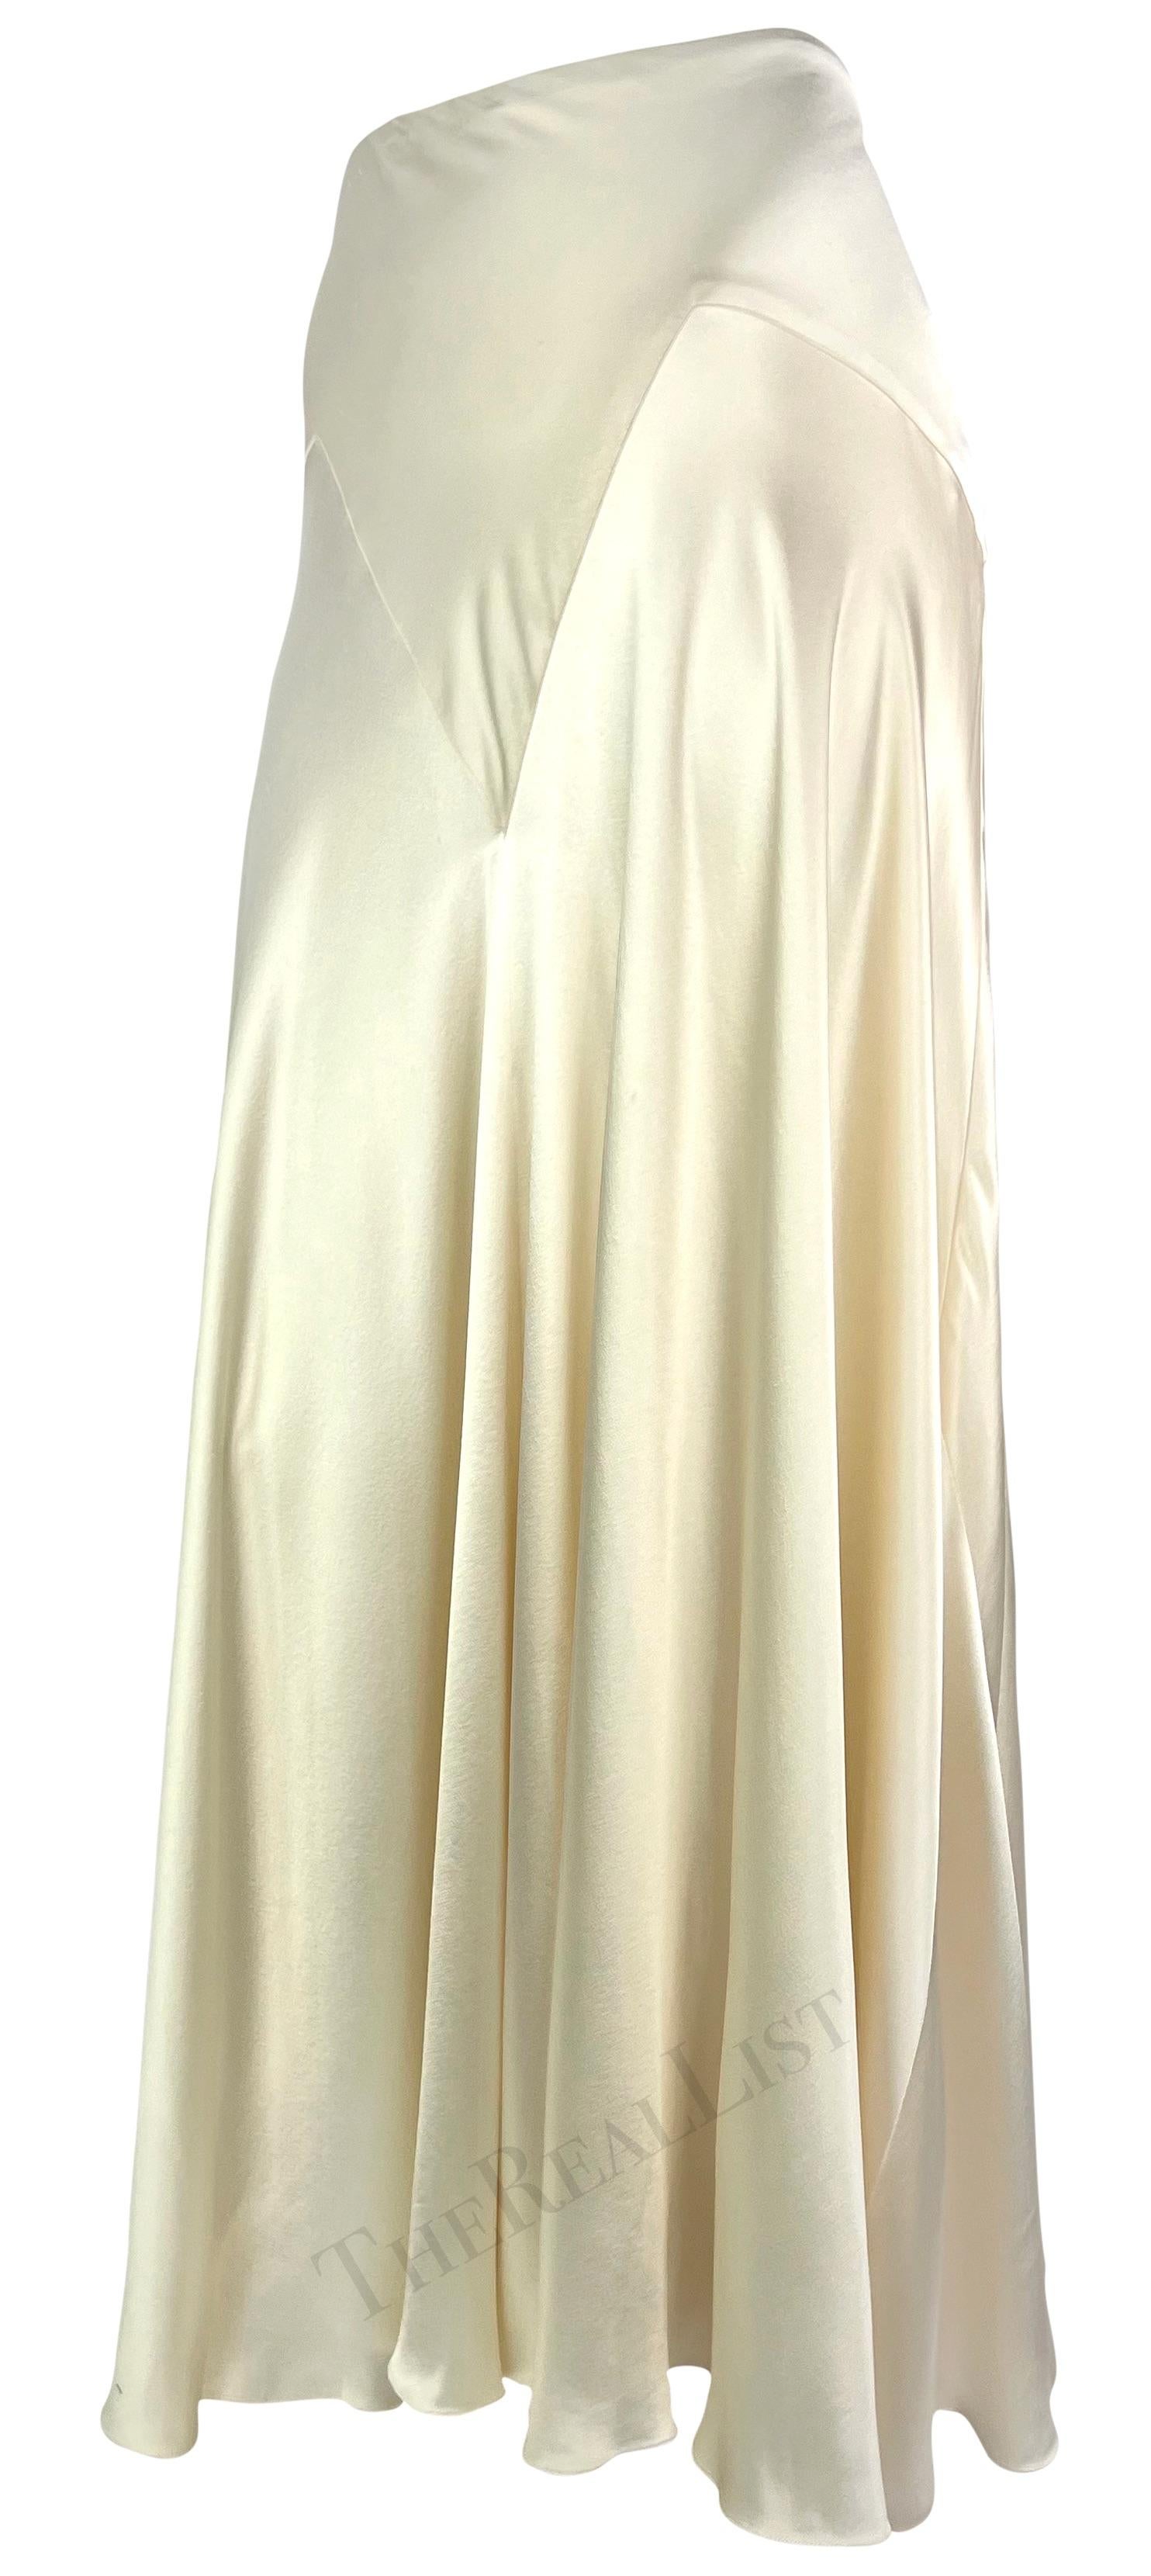 S/S 2005 Ralph Lauren Runway White Satin Voluminous Flare Maxi Skirt In Excellent Condition For Sale In West Hollywood, CA